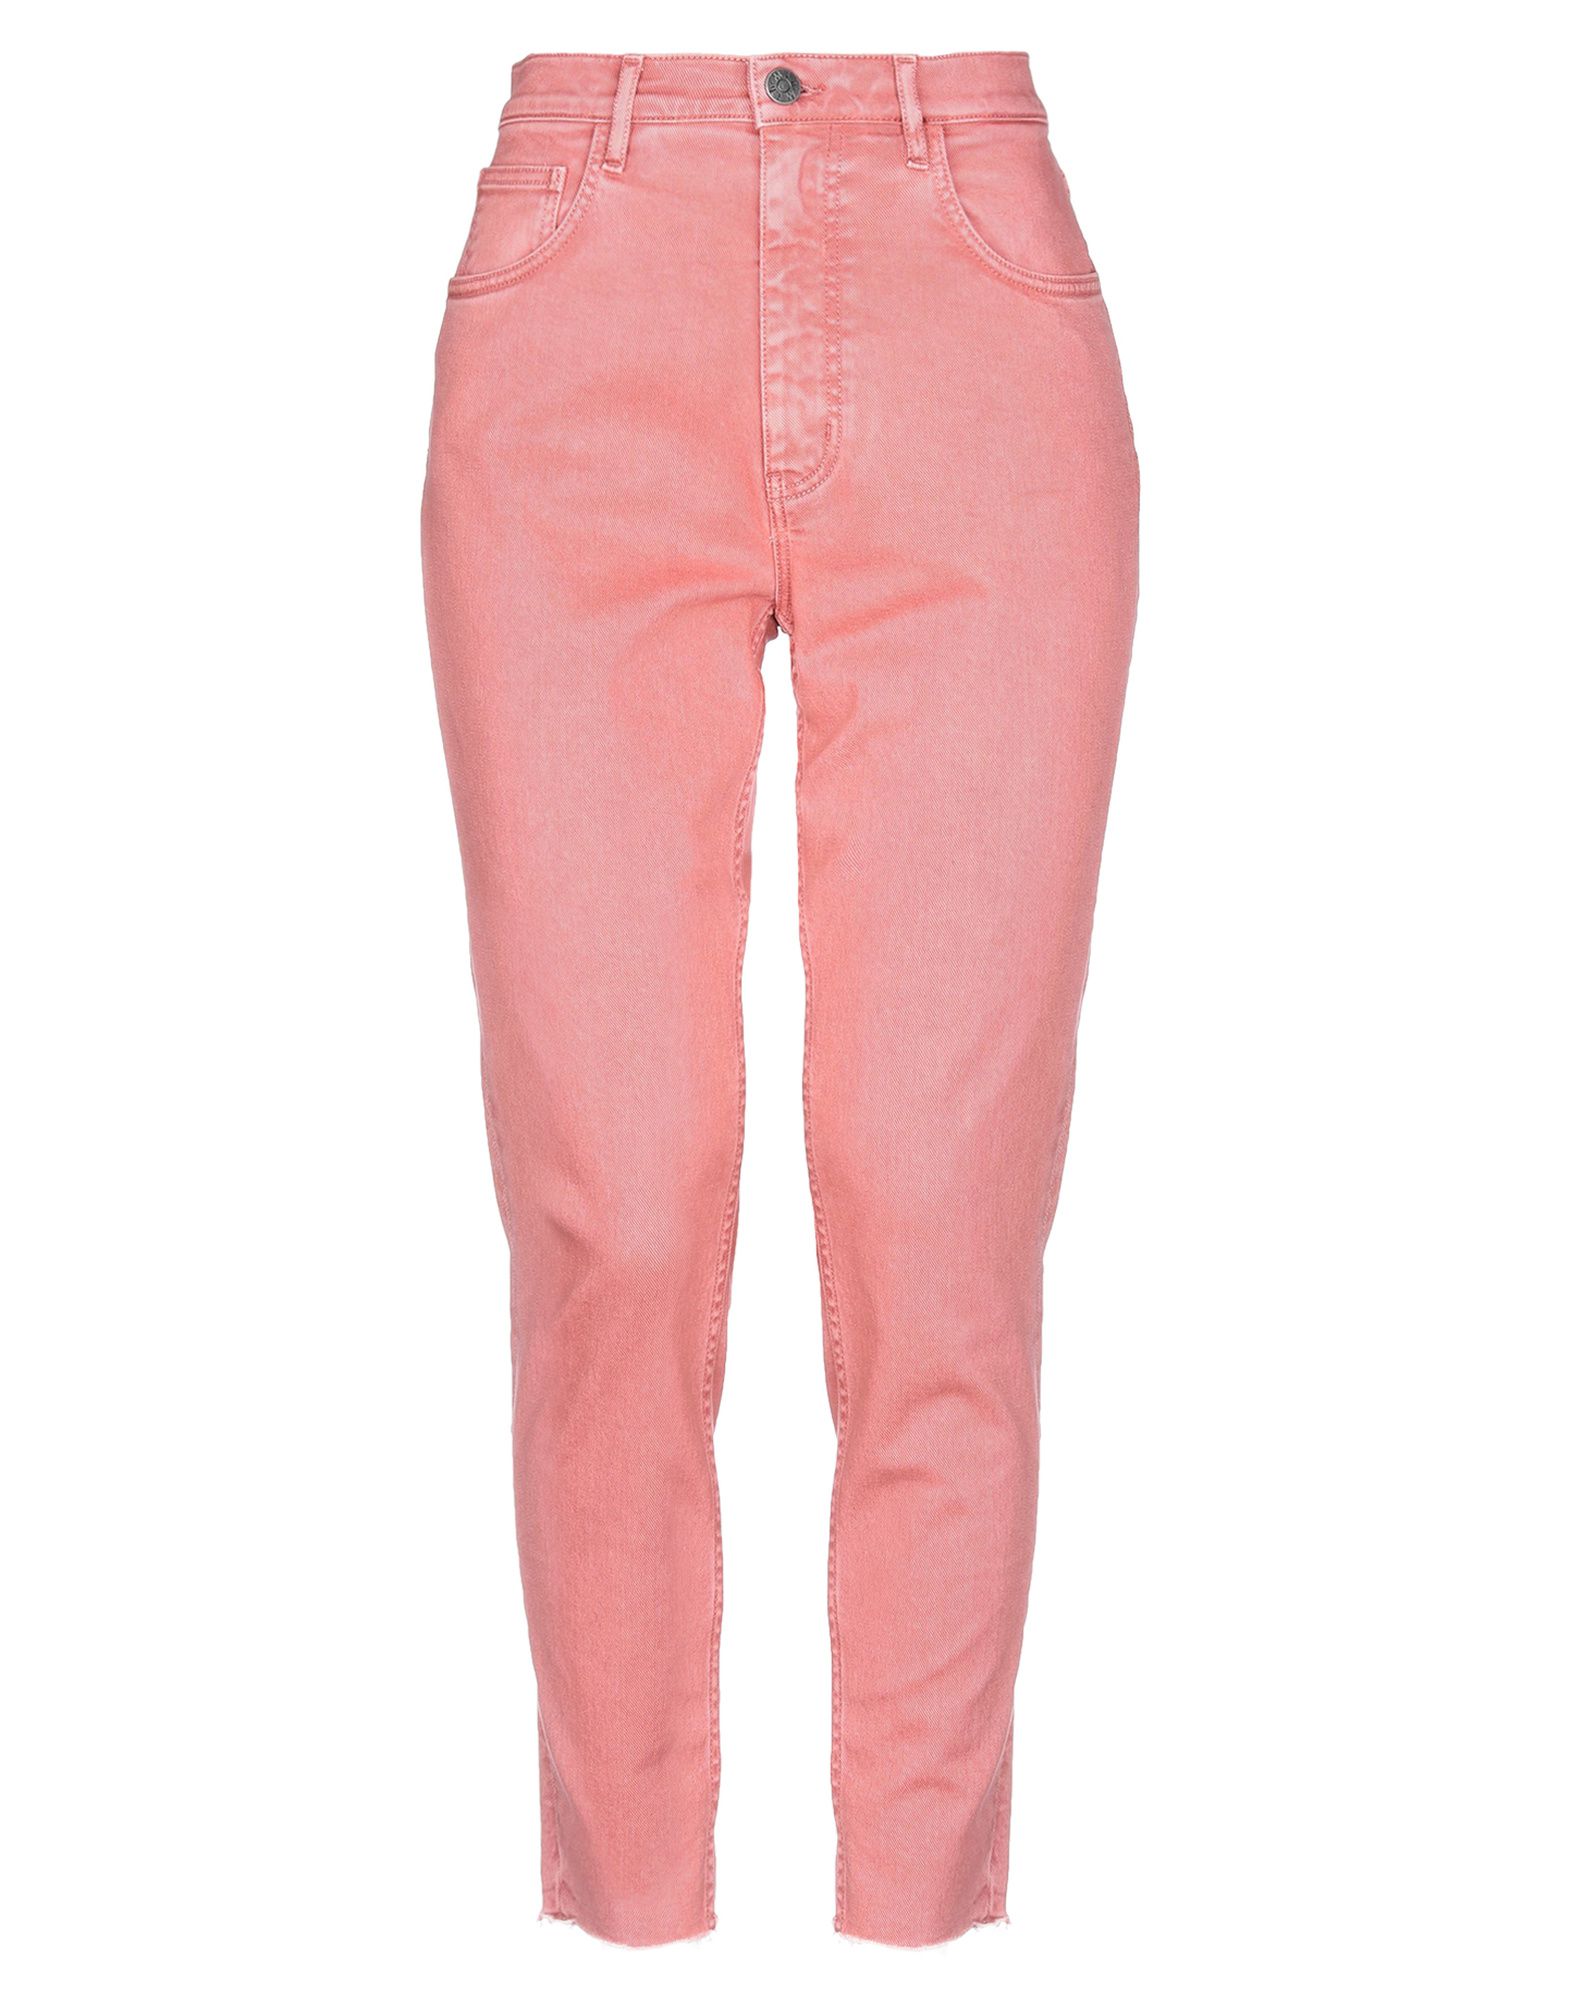 M.I.H. JEANS M. I.H JEANS WOMAN JEANS CORAL SIZE 26 COTTON, ELASTANE,42738670NN 3